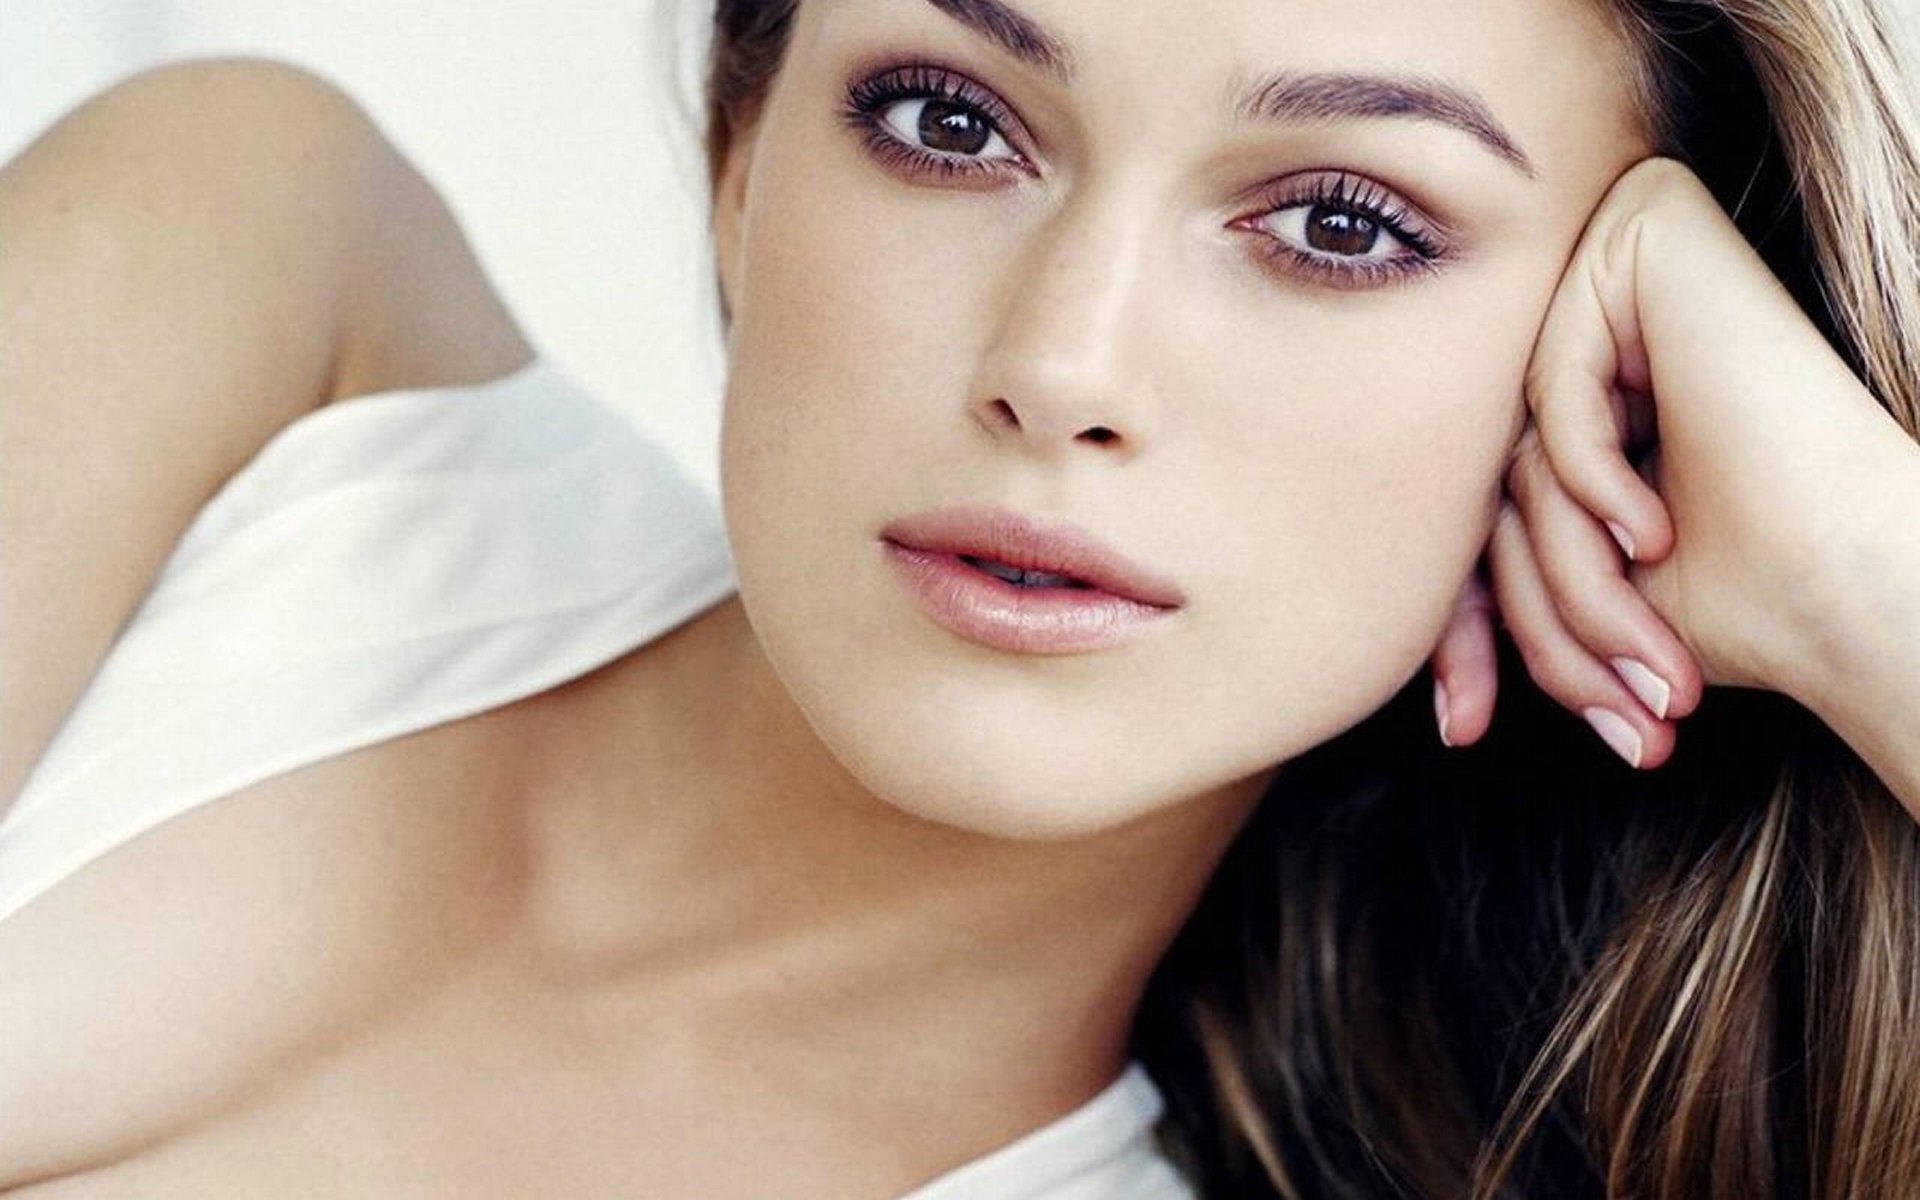 Keira Knightley Arena Pile Top 10 Typecast Actresses In The World